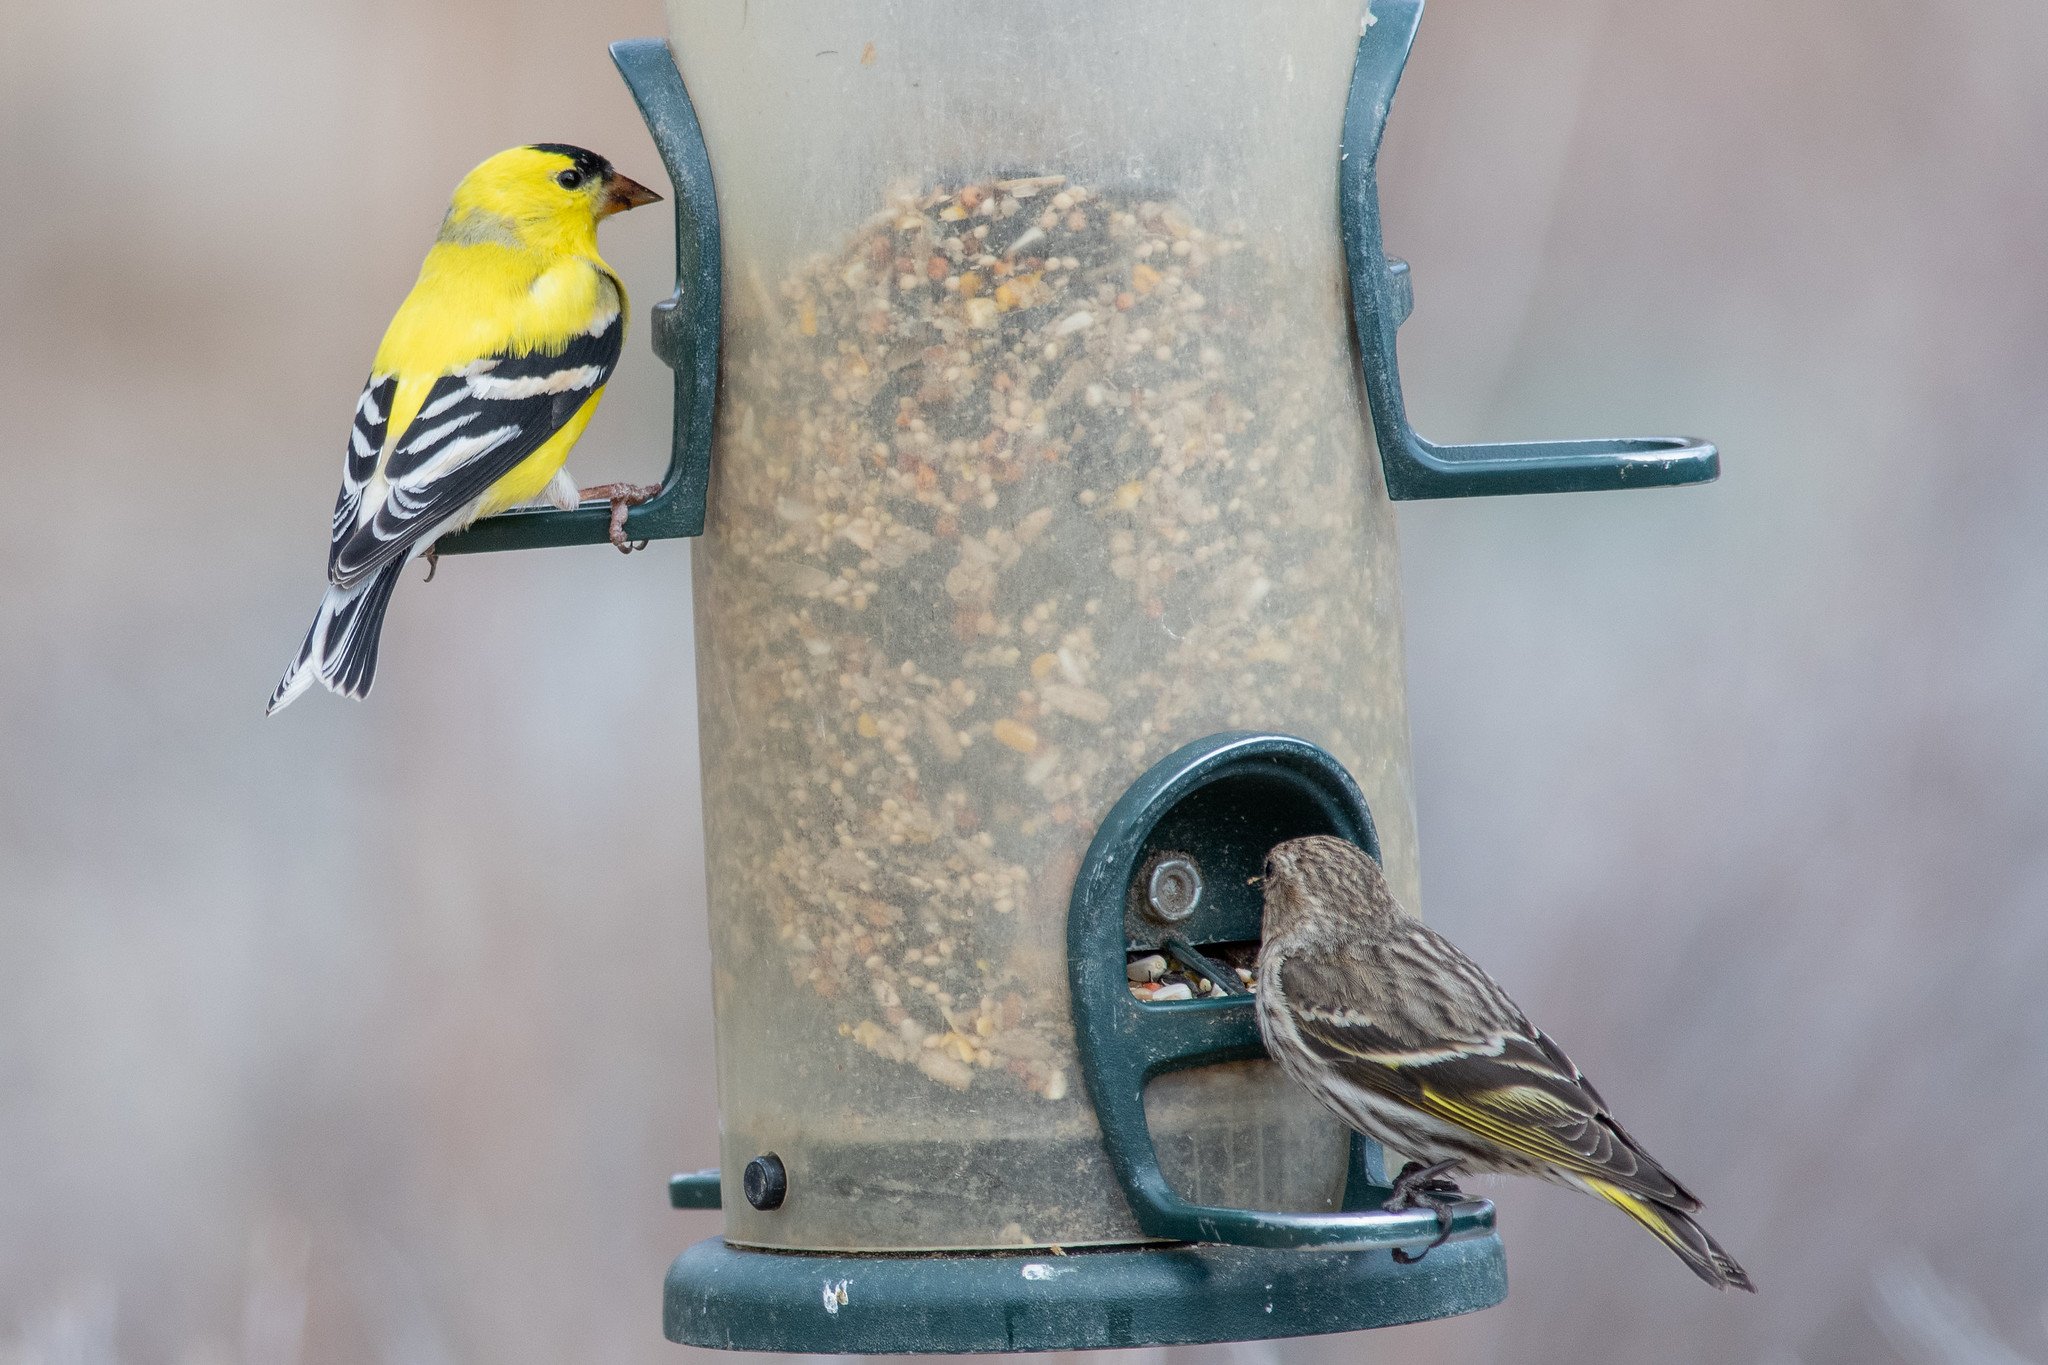 American Goldfinch (Spinus tristis) and Pine Siskin